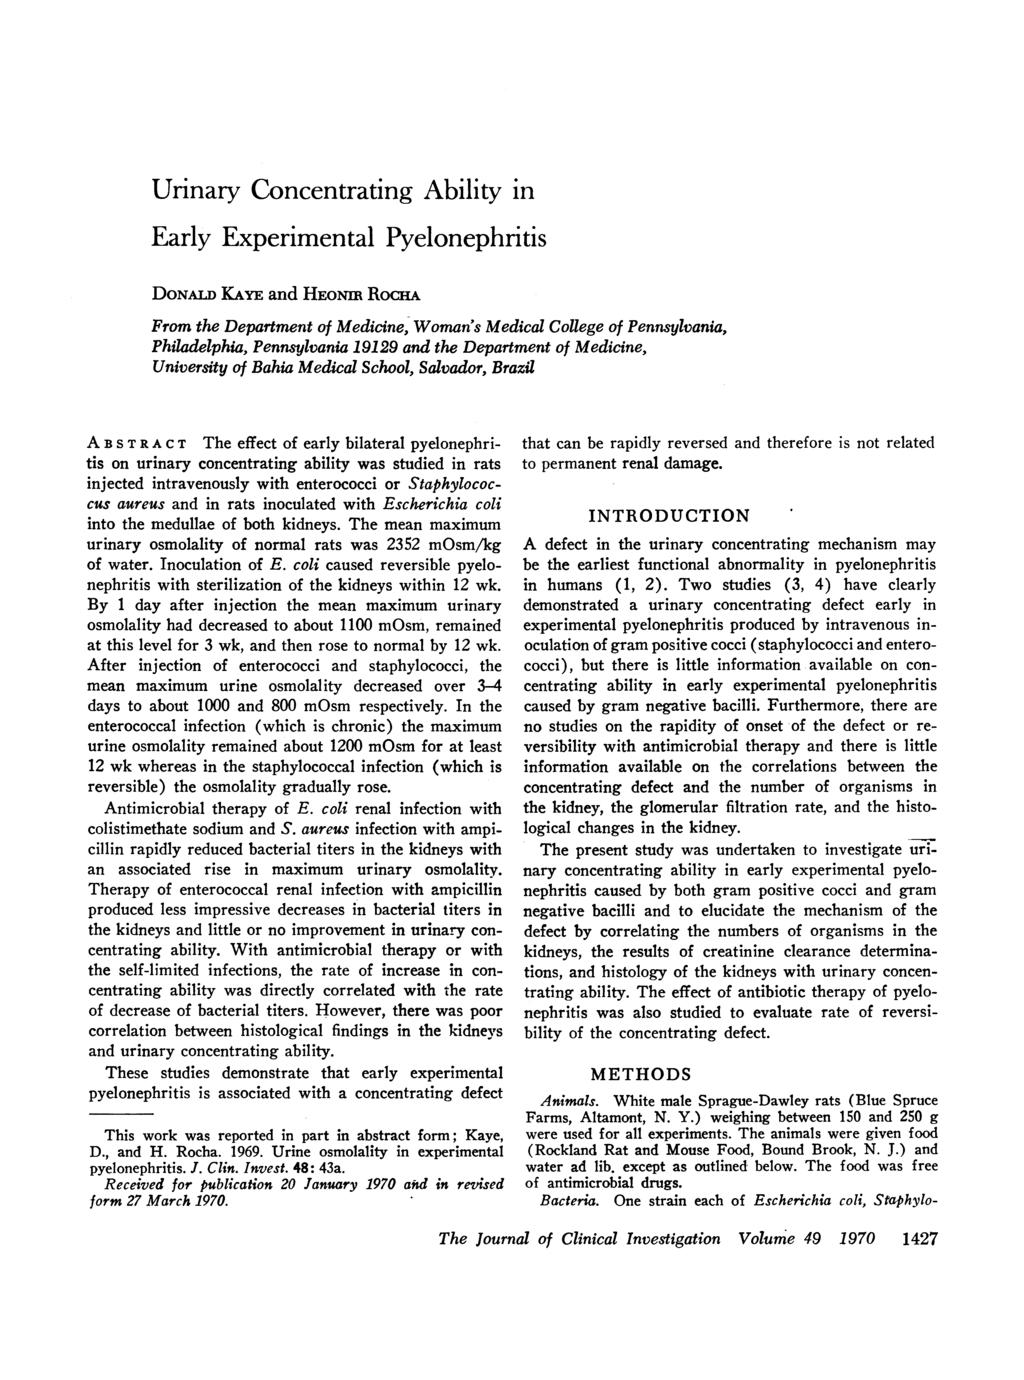 Urinary Concentrating Ability in Early Experimental Pyelonephritis DONALD KAYE and HEONIR Roca- From the Department of Medicine, Woman's Medical College of Pennsylvania, Philadelphia, Pennsylvania